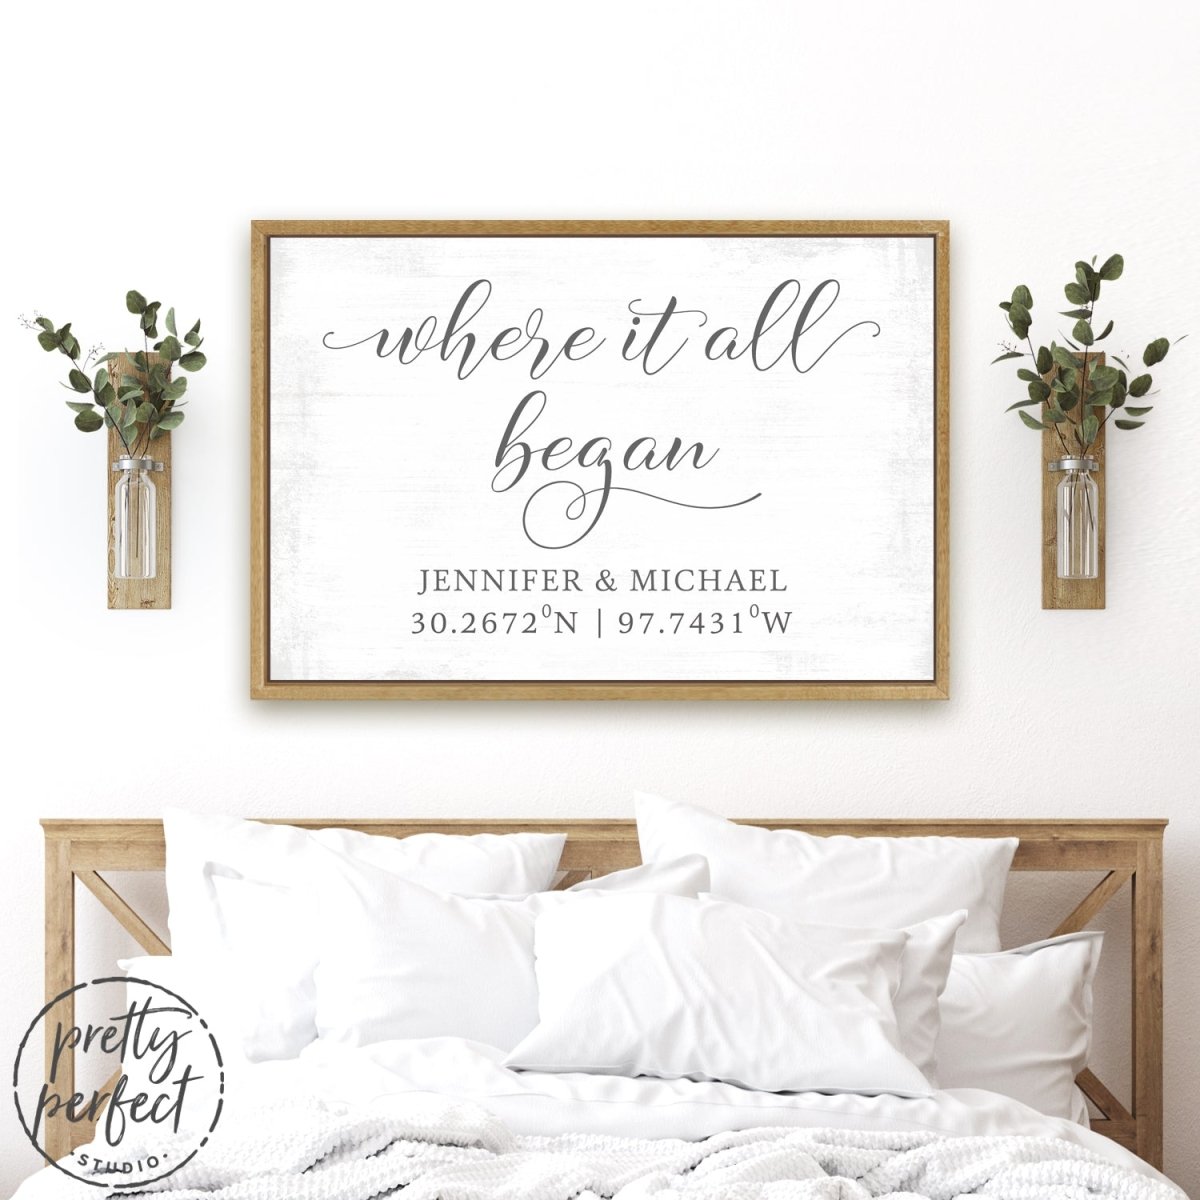 Where It All Began Sign With Name & Location Above Bed - Pretty Perfect Studio